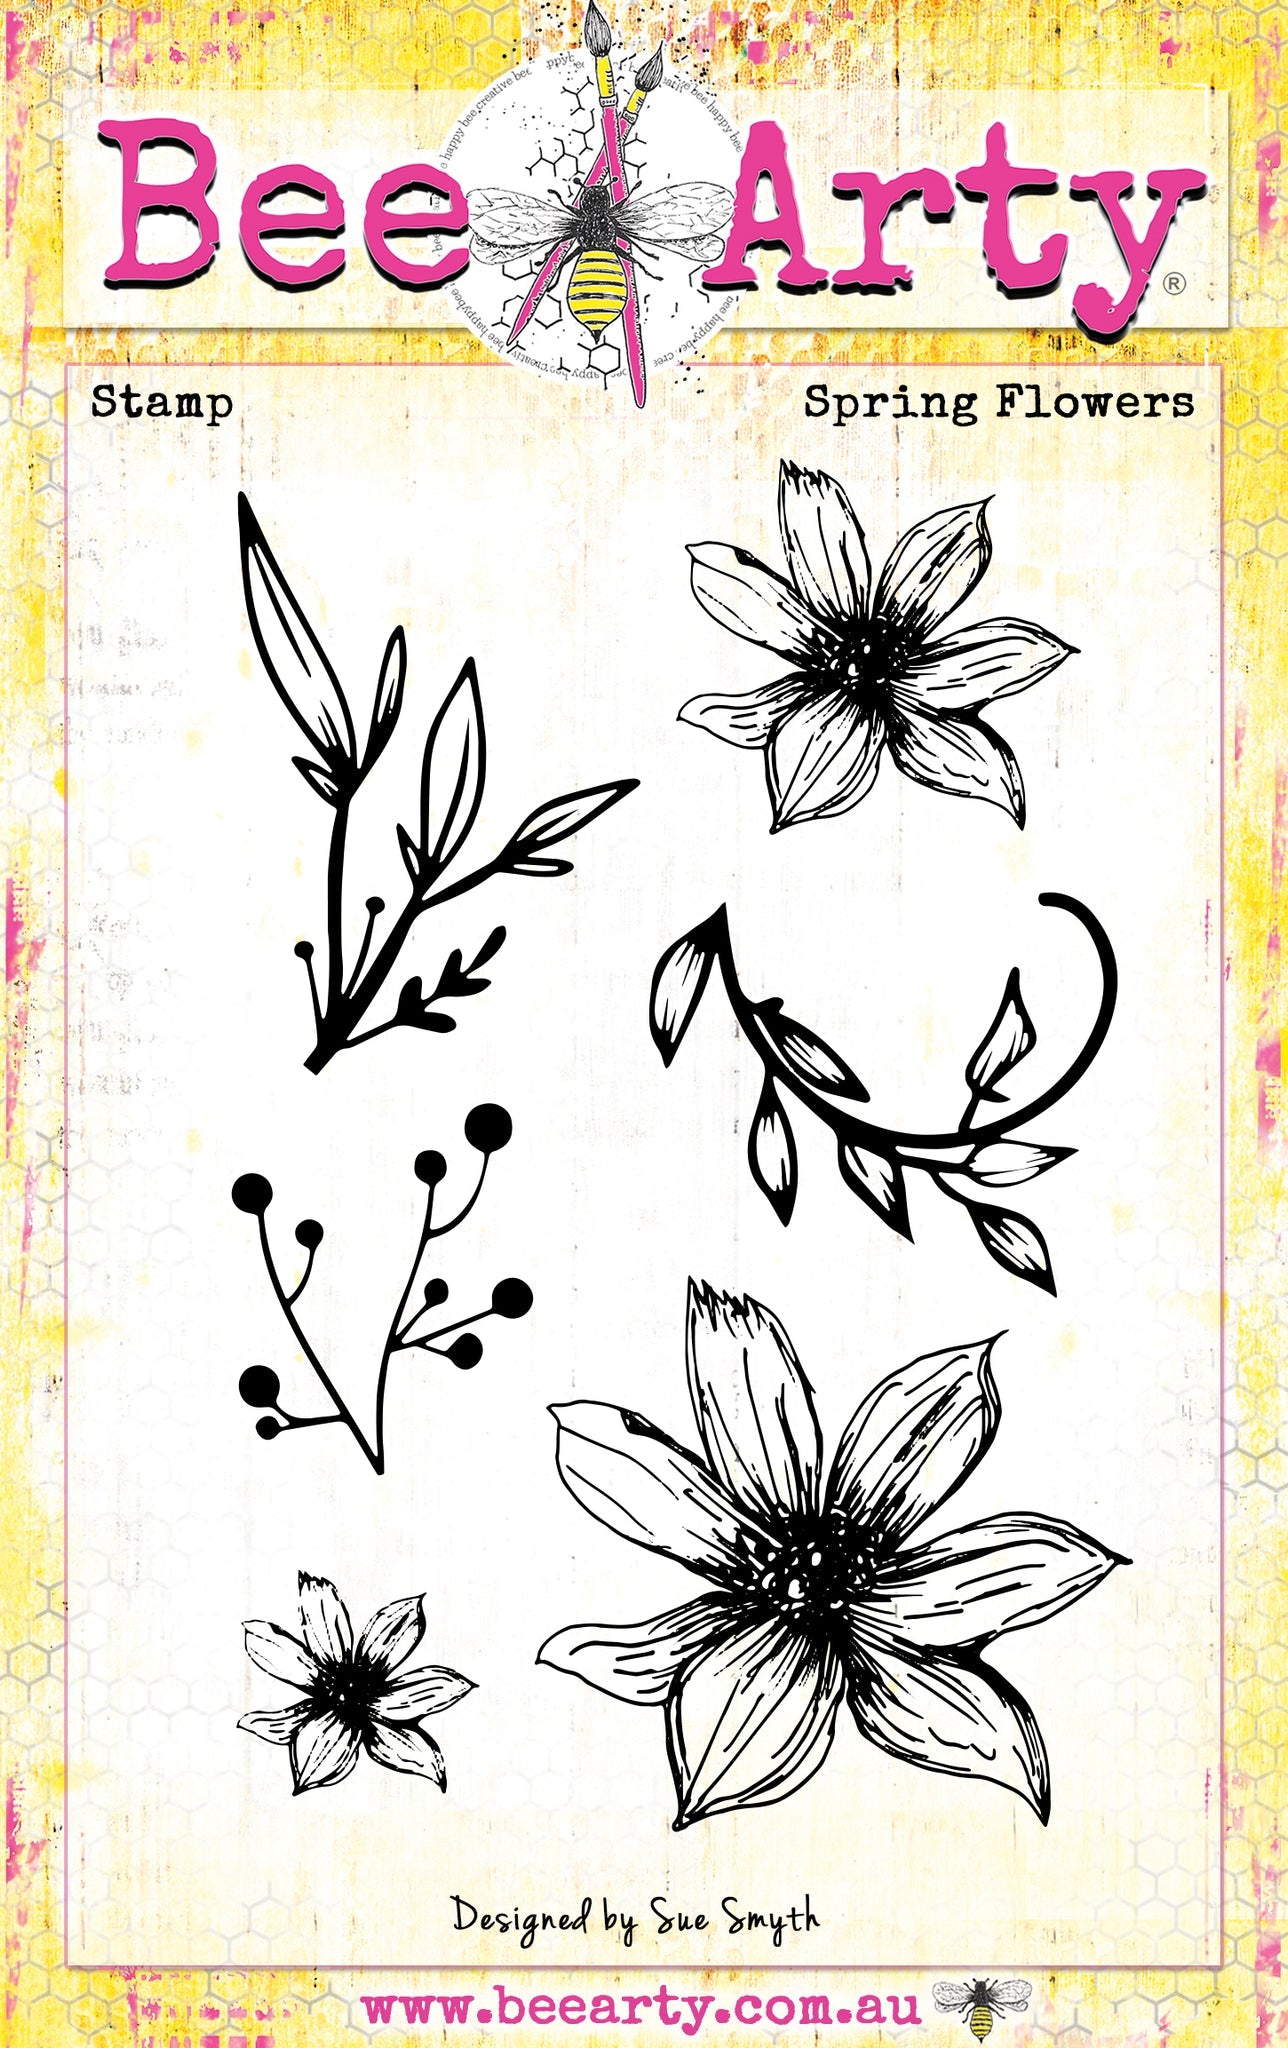 Beearty Clear Stamp set - Spring Flowers